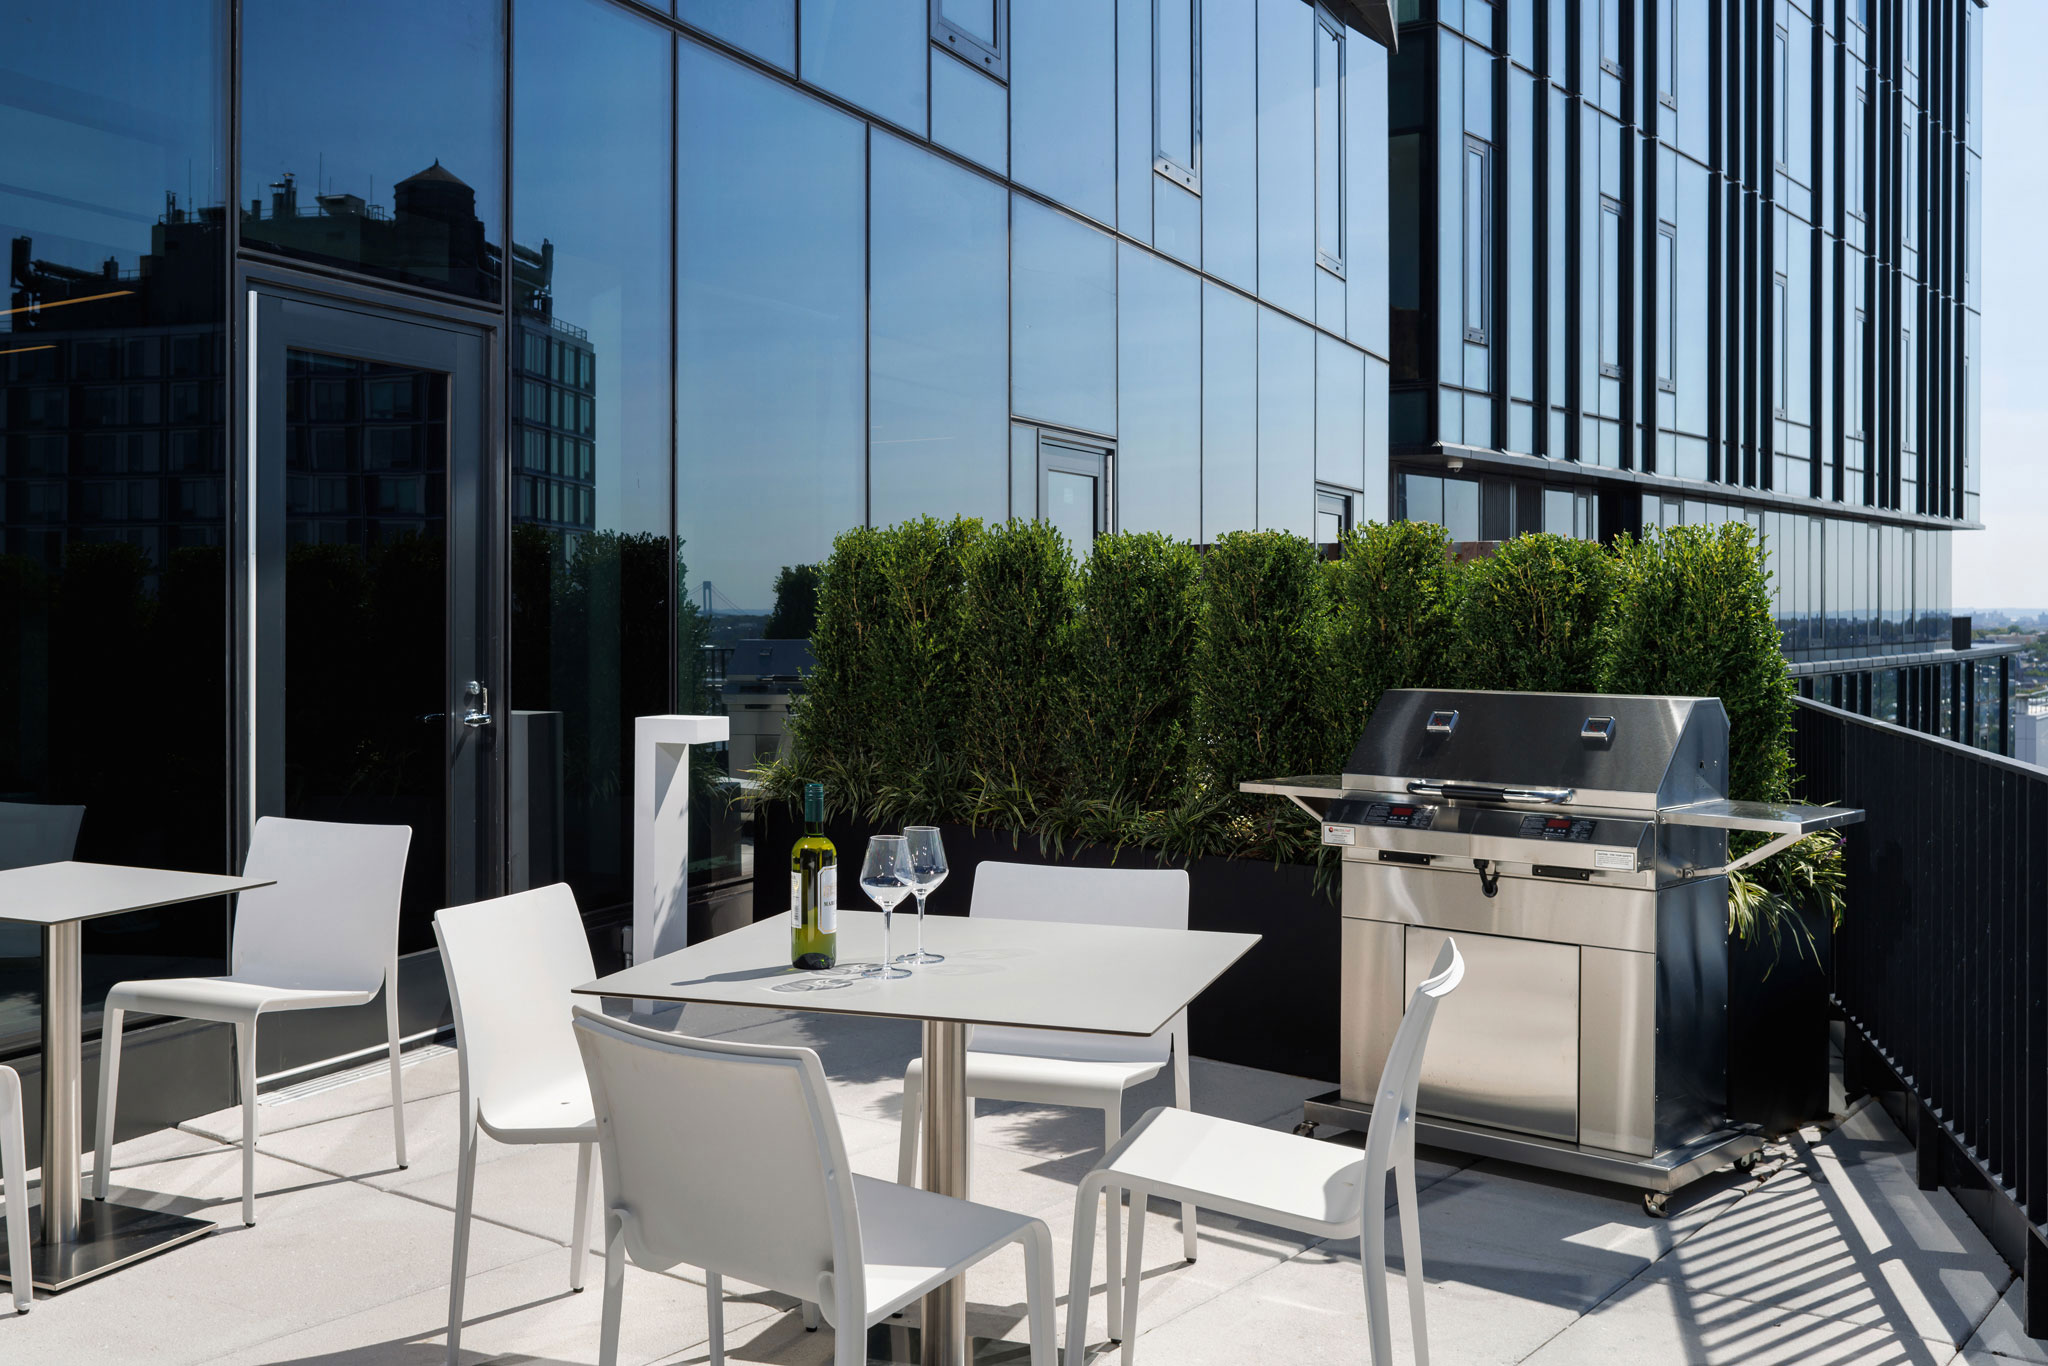 Brooklyn Crossing 27th floor amenity terrace with a grill for barbecuing